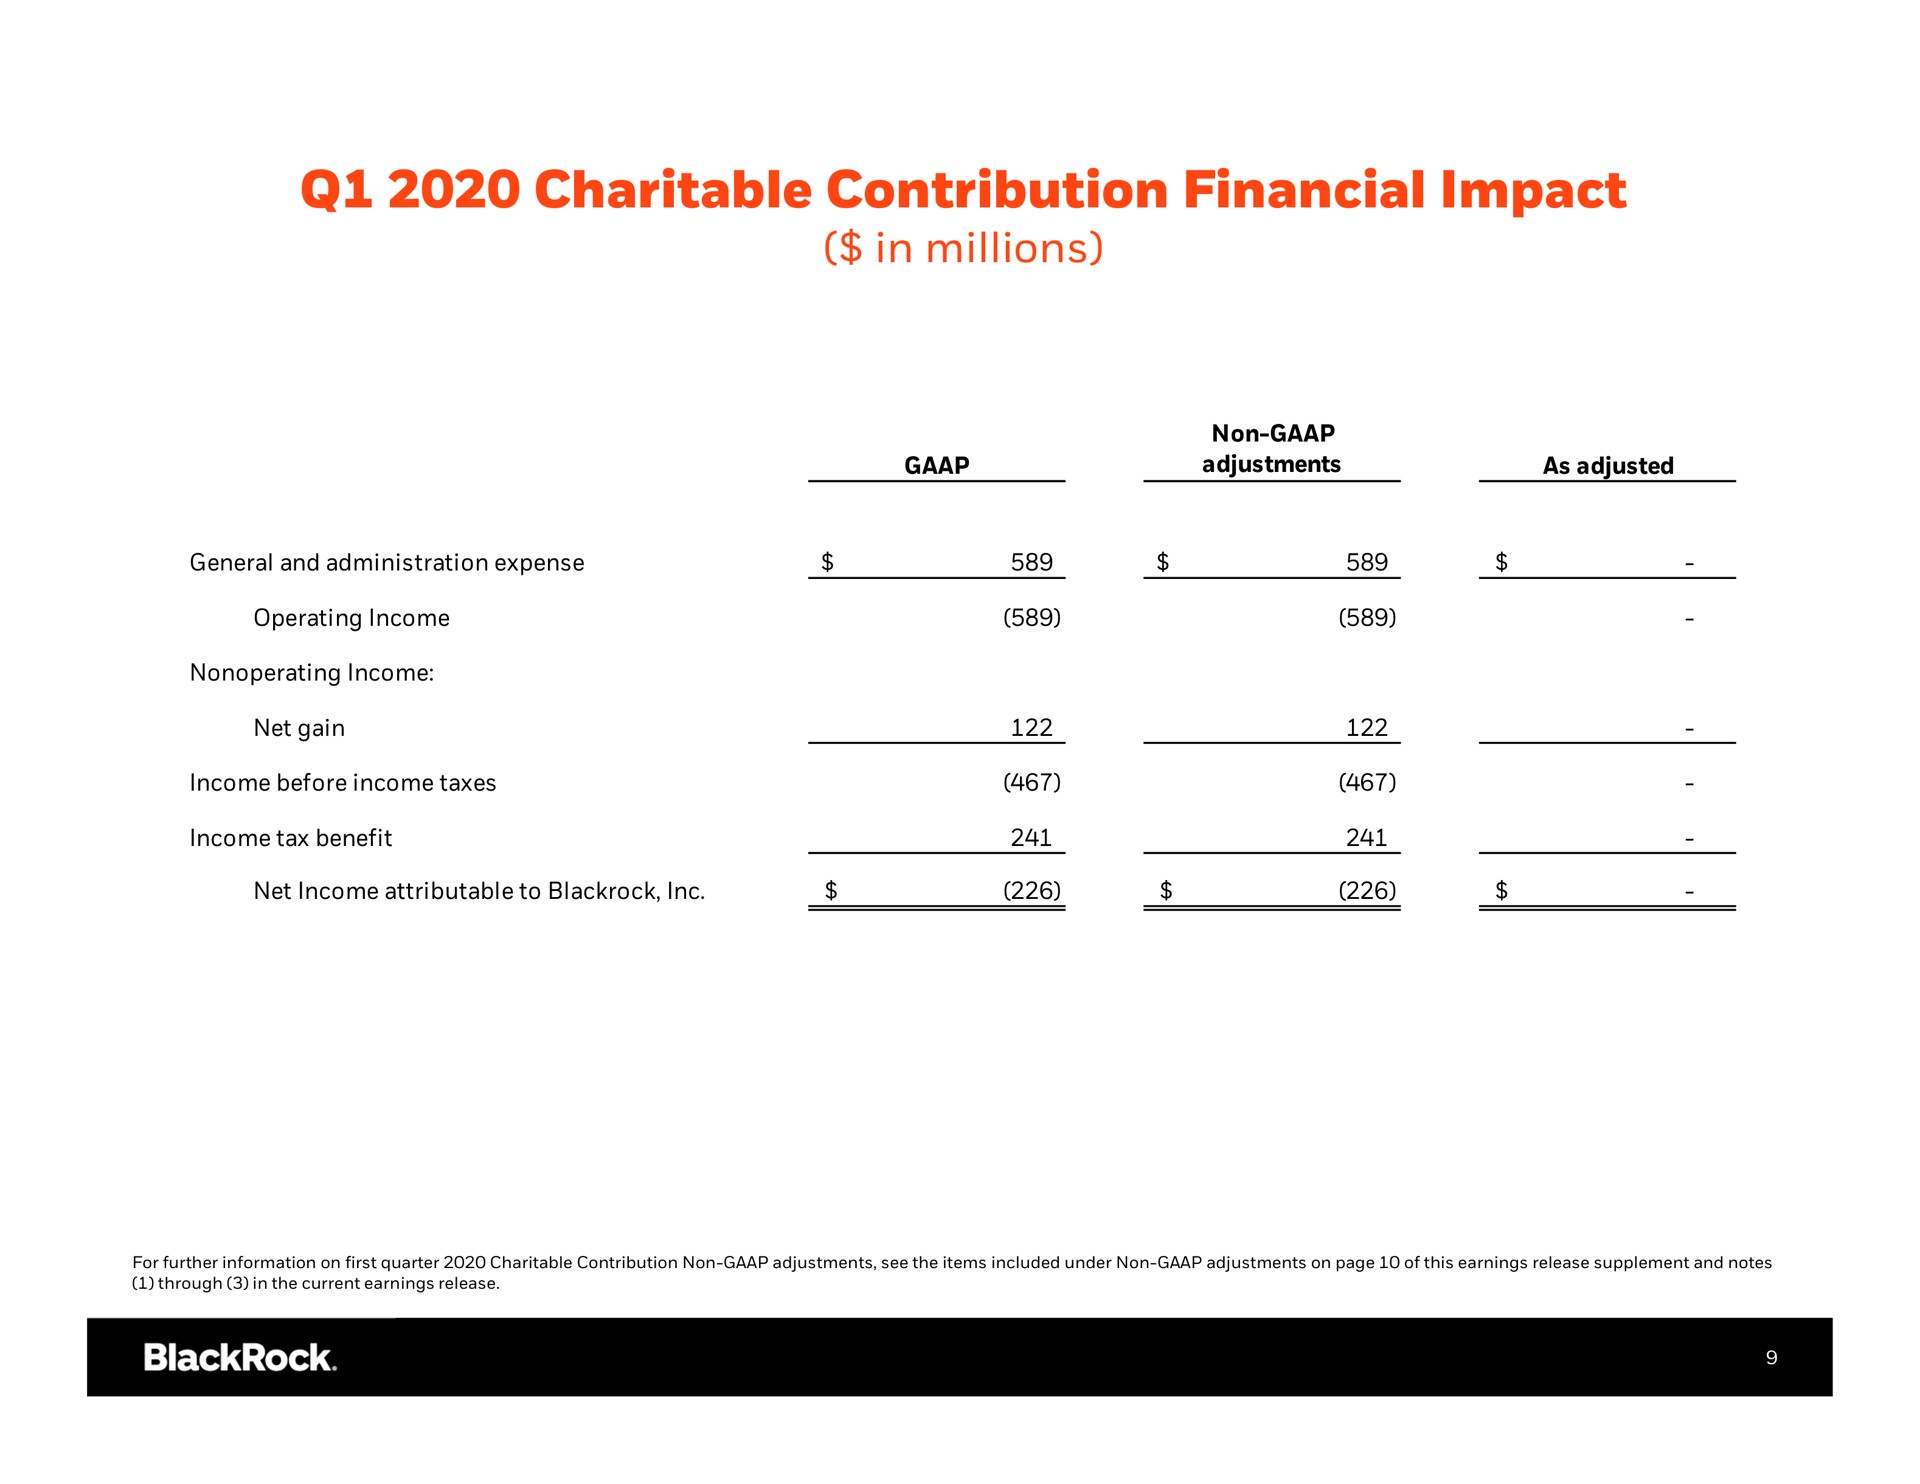 charitable contribution financial impact in millions | BlackRock